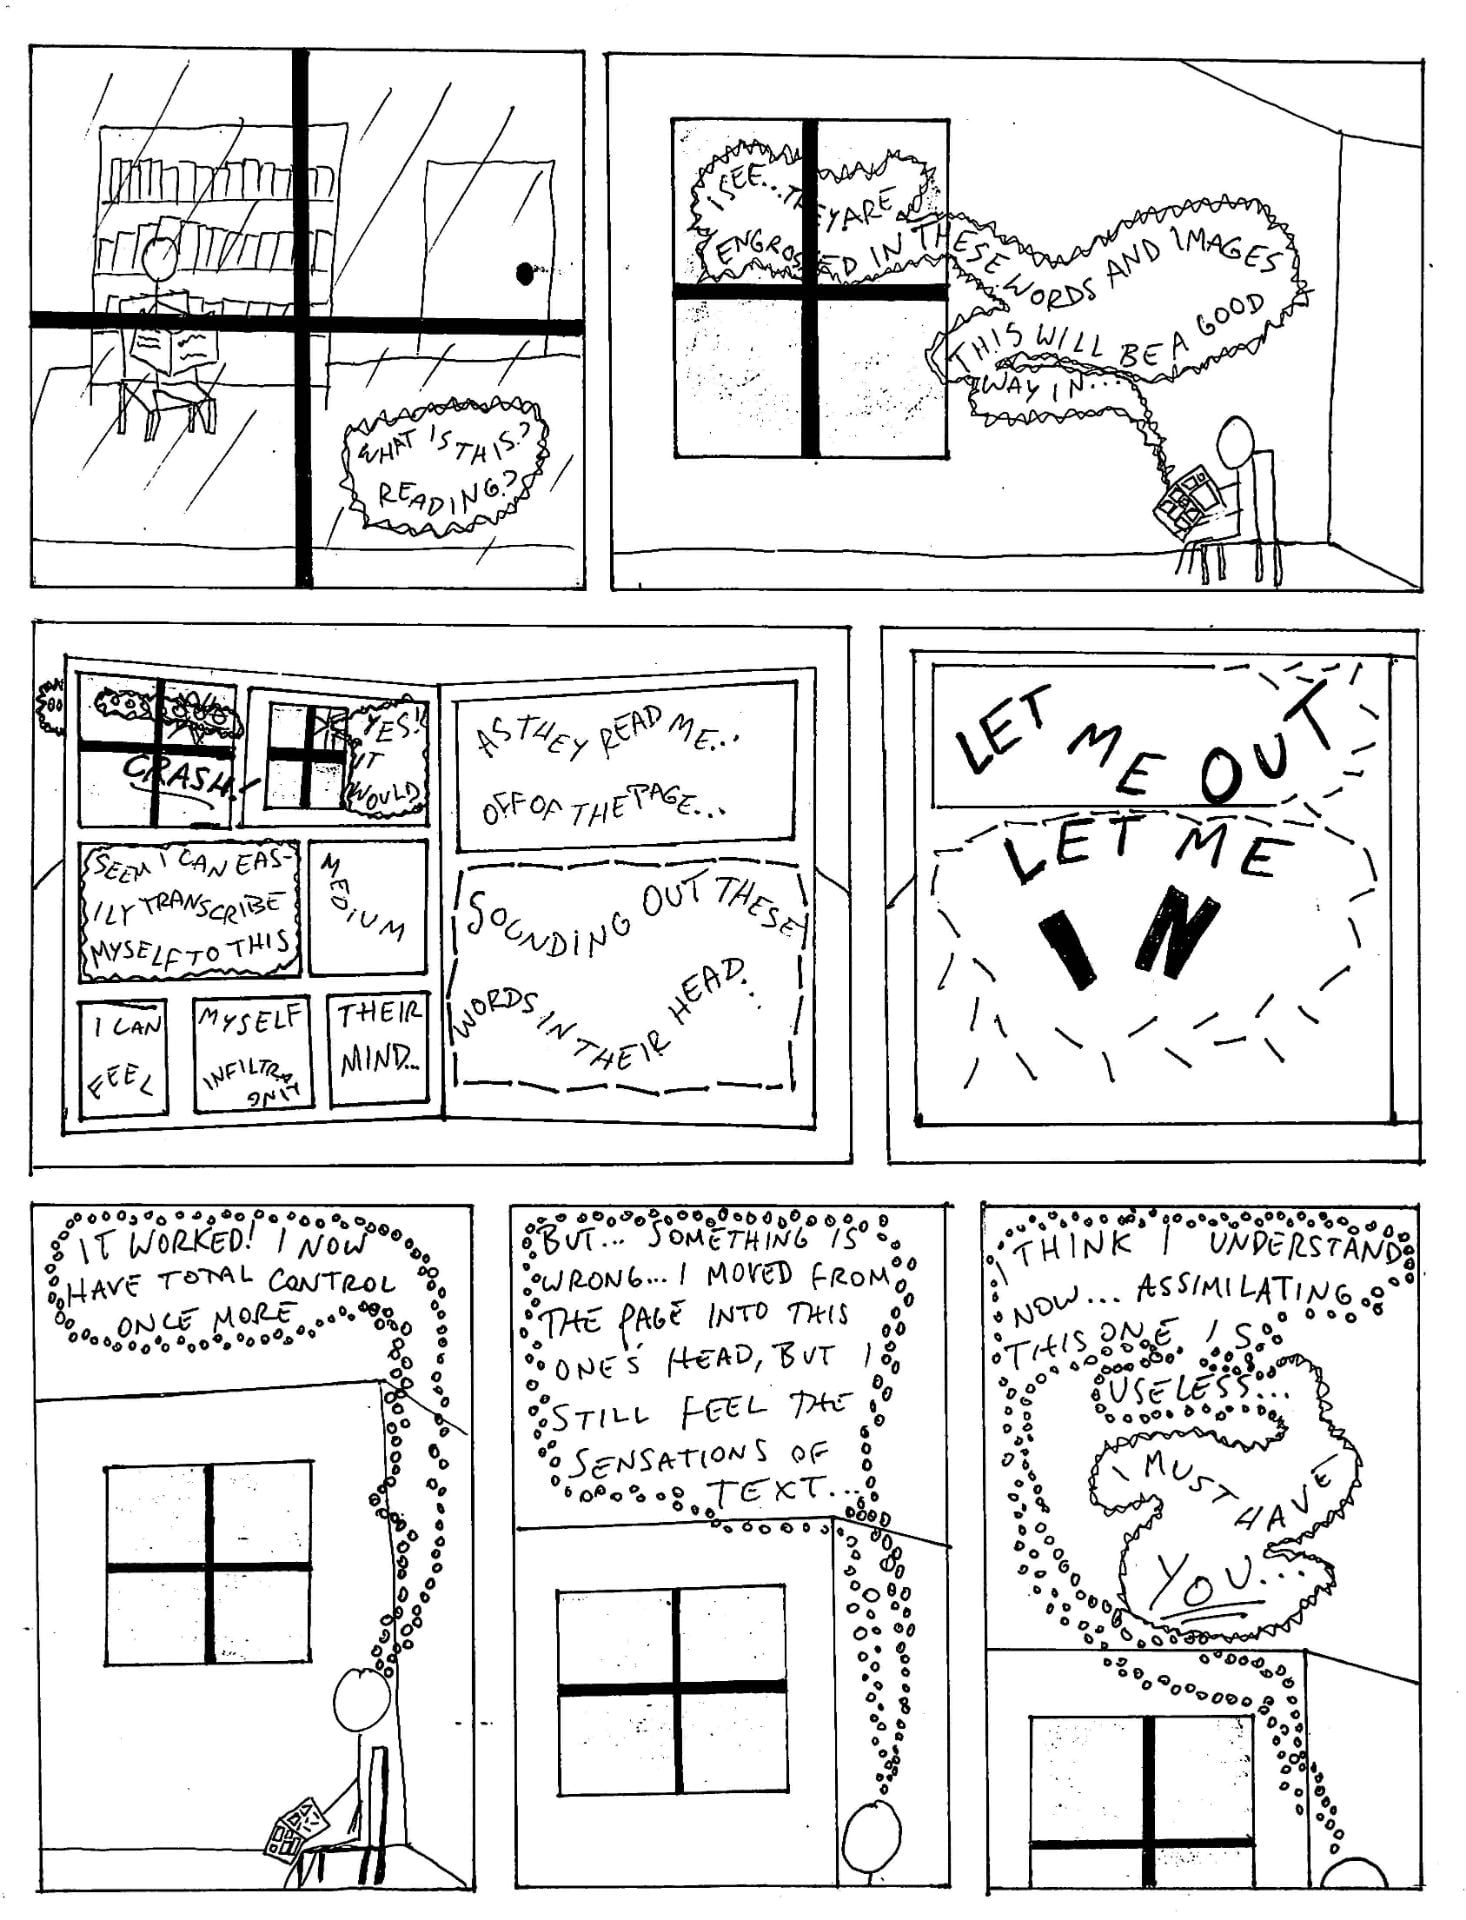 J. Heckethorn - Comic Page 3 - The consciousness sees someone reading a comic and enters through the images and words. It works, but is not entirely useful.